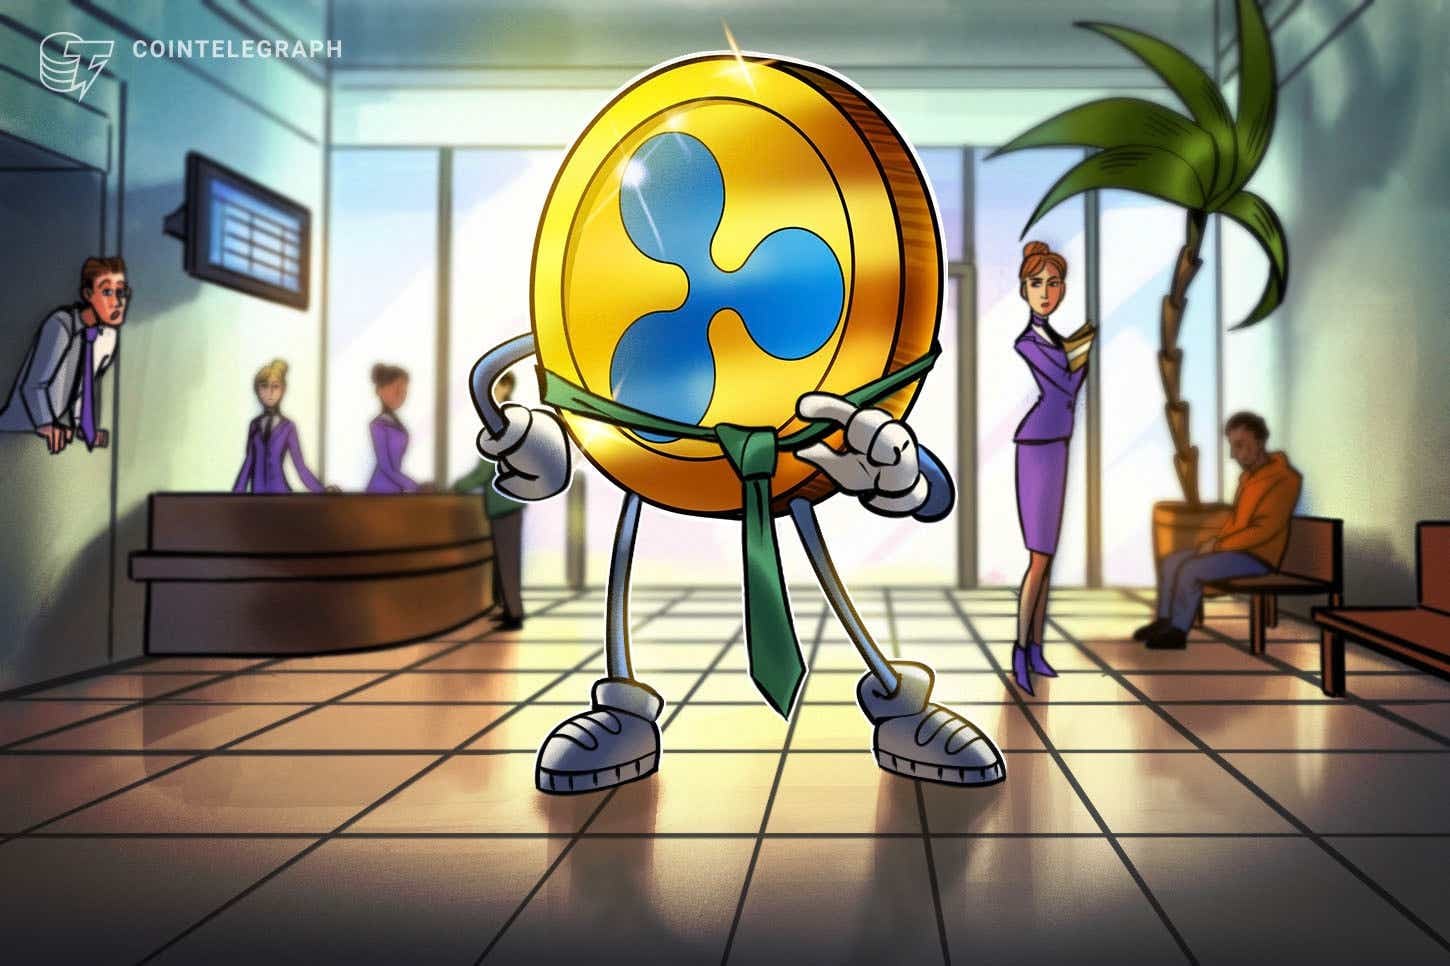 Ripple outlines possible regulatory framework for crypto industry in US